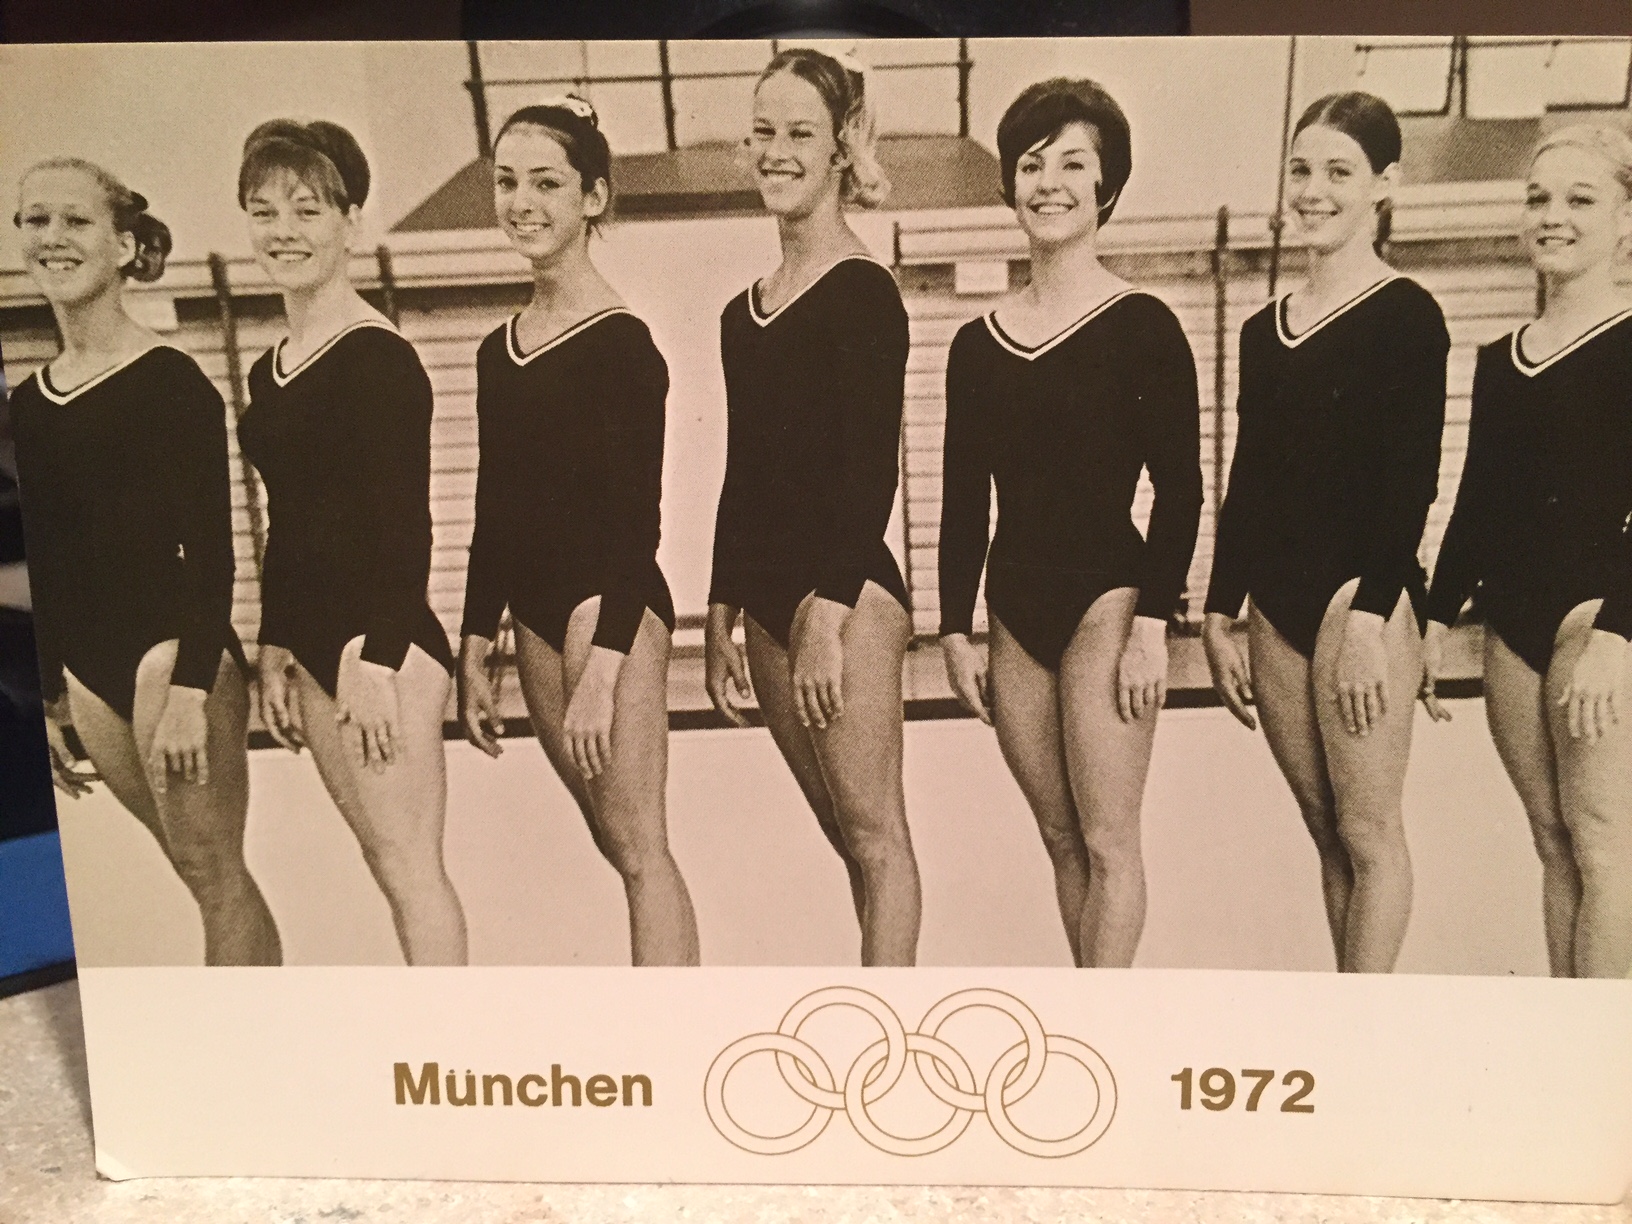 1972 Olympic gymnastics team - Roxanne is the tall one in the middle